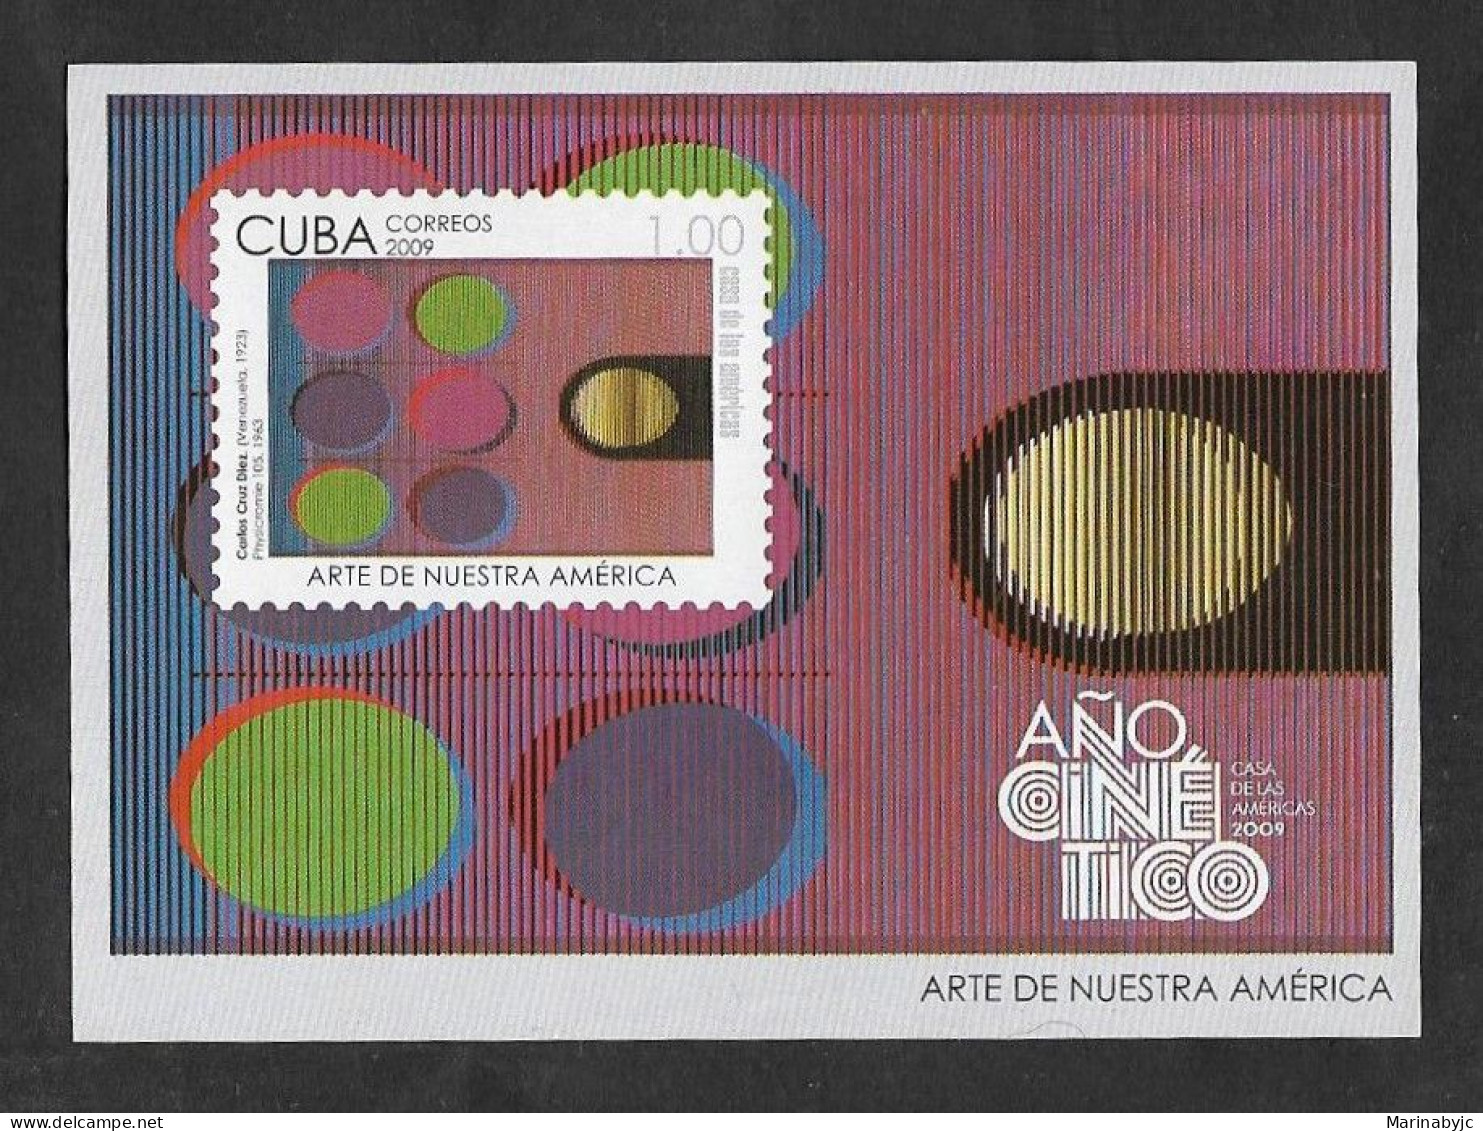 SE)2009 CUBA, FROM THE CINETIC ART SERIES, HOUSE OF THE AMERICAS, SS, MNH - Gebruikt